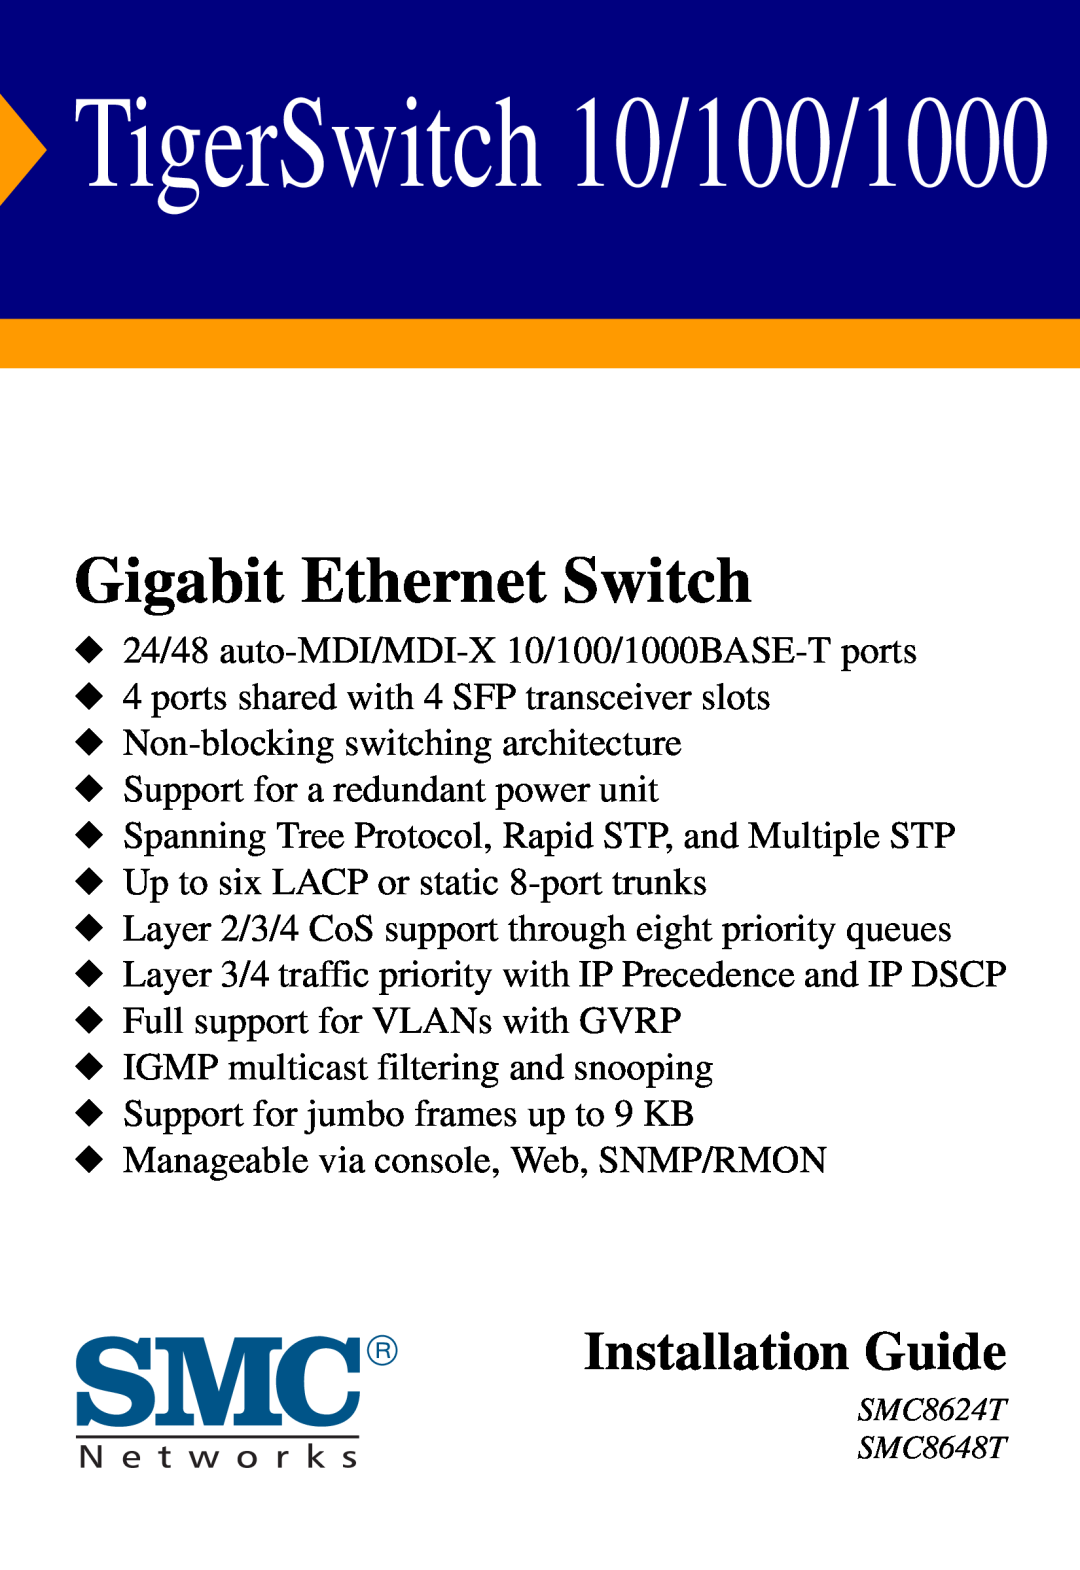 SMC Networks SMC8624T manual Gigabit EthernetSwitch, TigerSwitch 10/100/1000, Installation Guide 